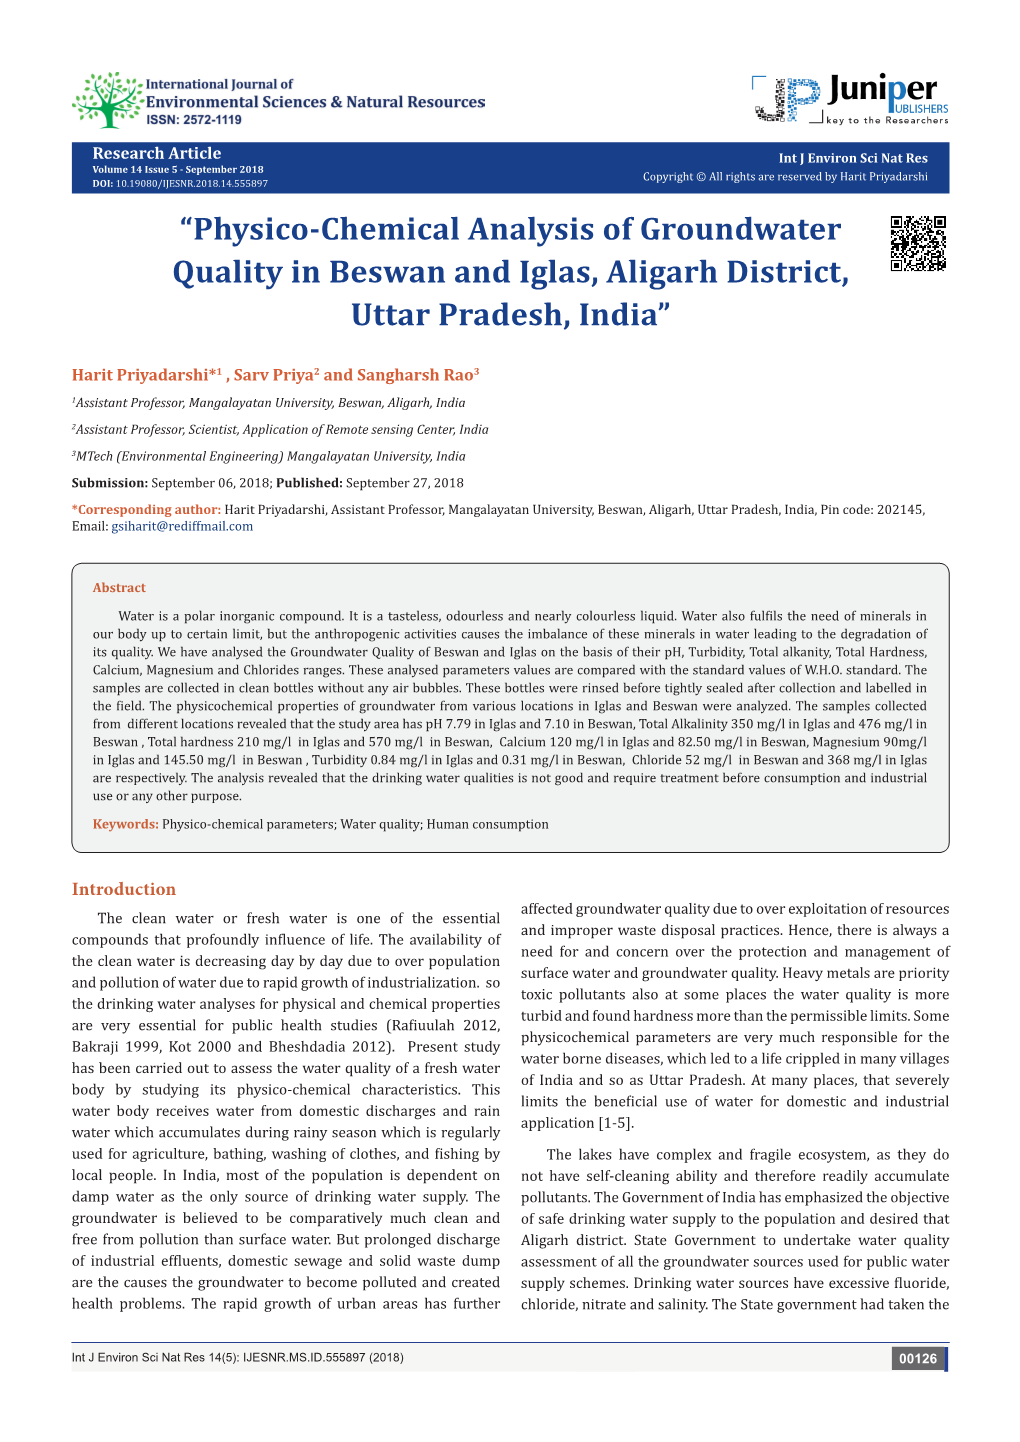 “Physico-Chemical Analysis of Groundwater Quality in Beswan and Iglas, Aligarh District, Uttar Pradesh, India”